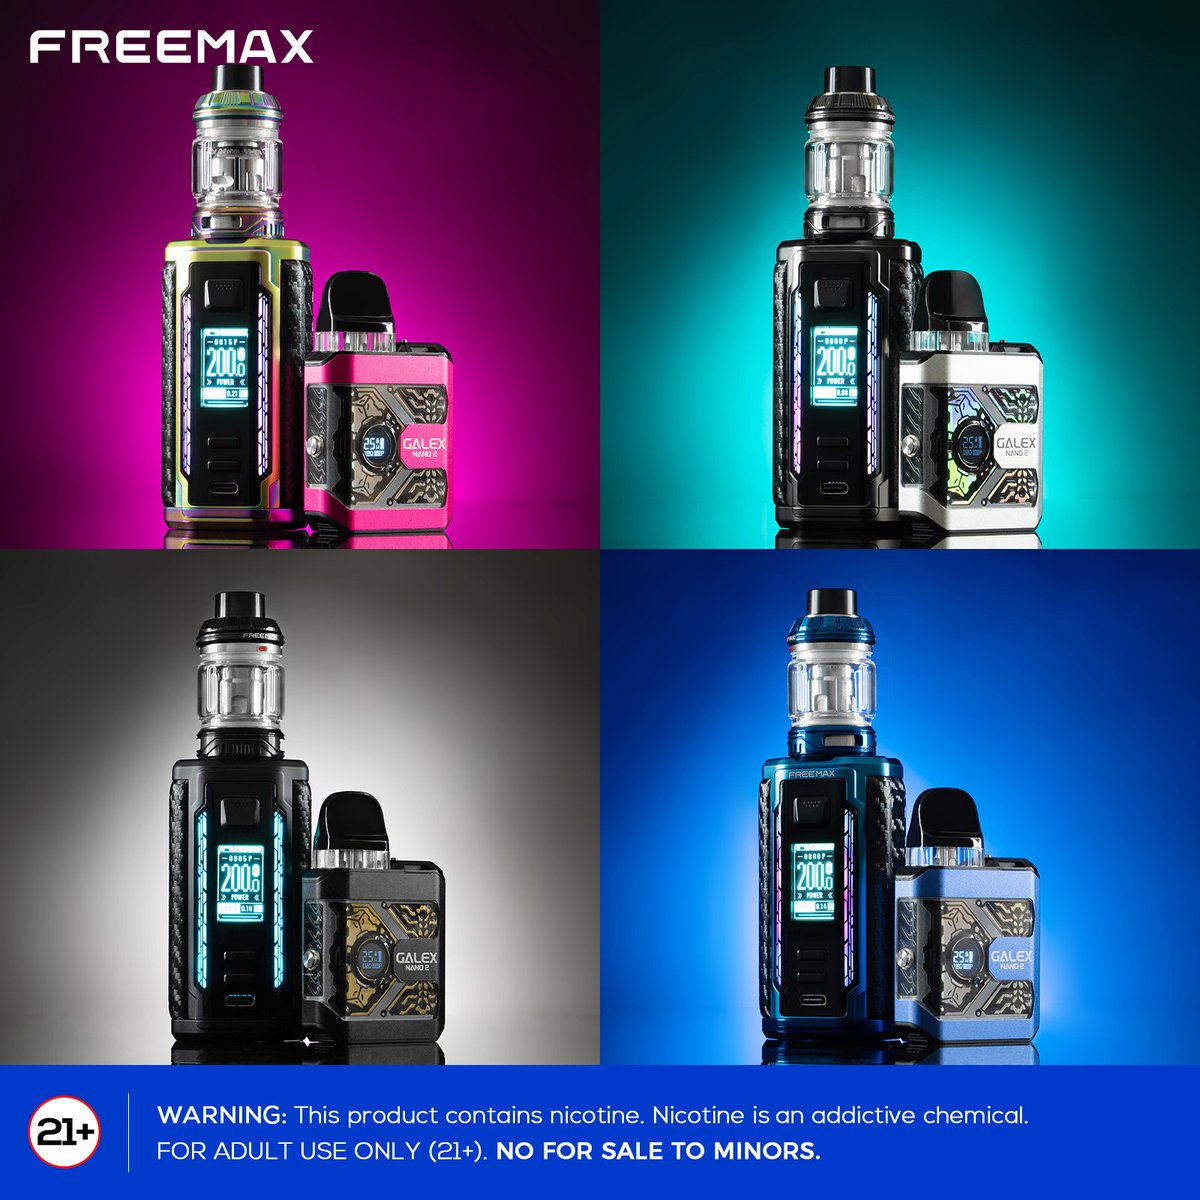 Which combo do you prefer? 🤔
.
.
.
.
.
Warning: This product contains nicotine. Nicotine is an addictive chemical.
Must be 21+.
-
#freemaxvape #freemaxtech #galexprokit #rgblighting #podsystem #podmod #maxus3 #galexnano2 #maxus200w